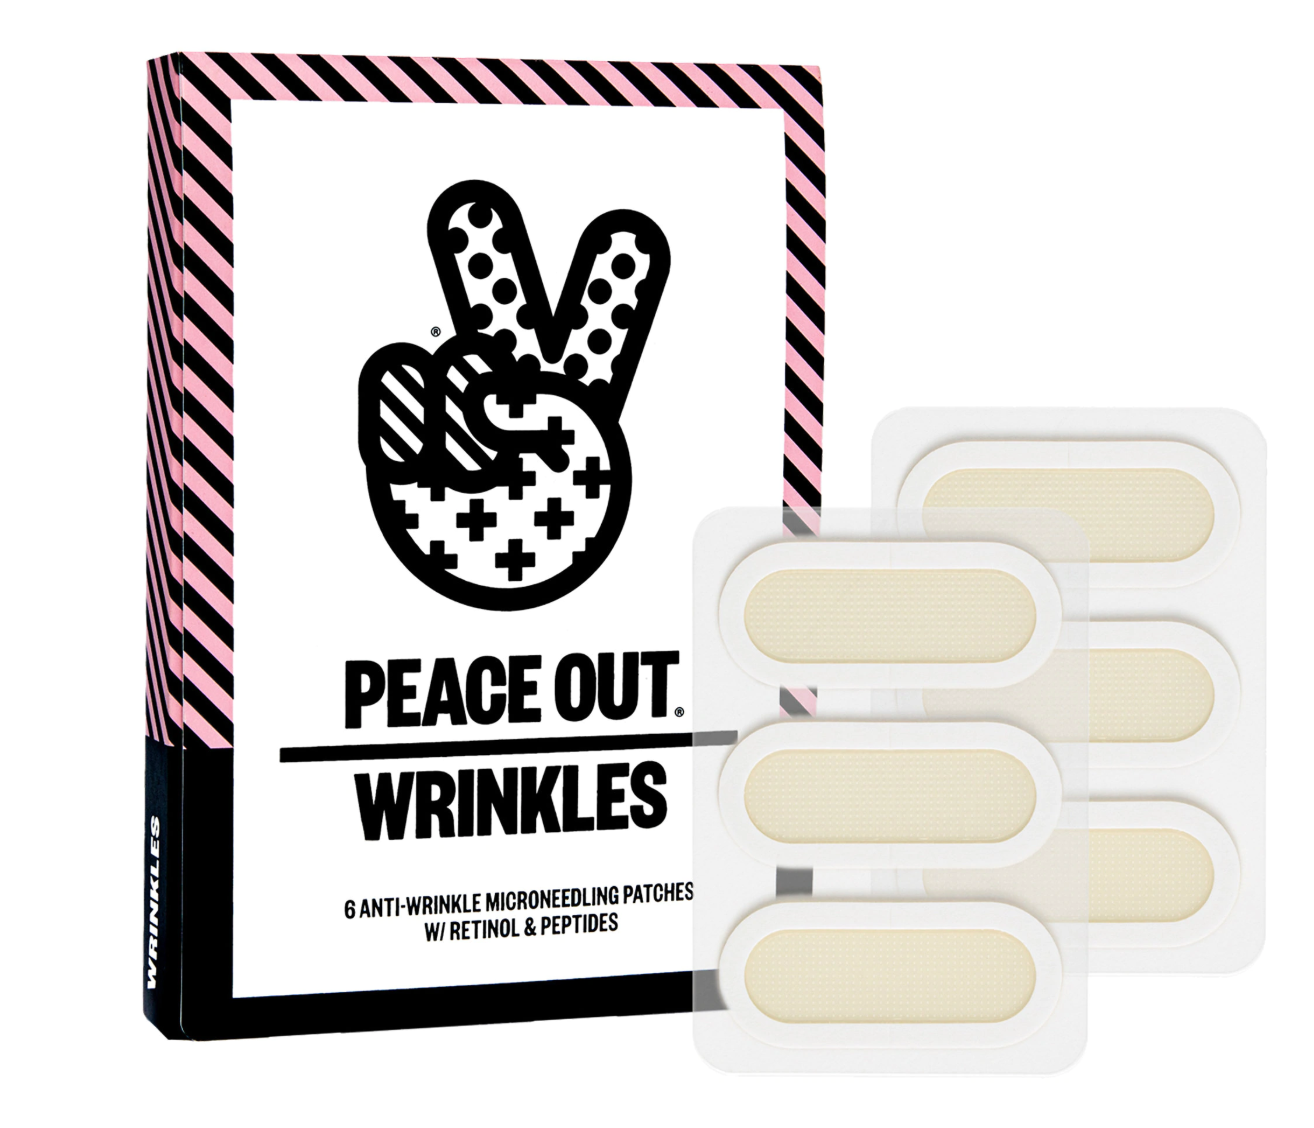 PEACE OUT Microneedling Anti-Wrinkle Retinol Patches